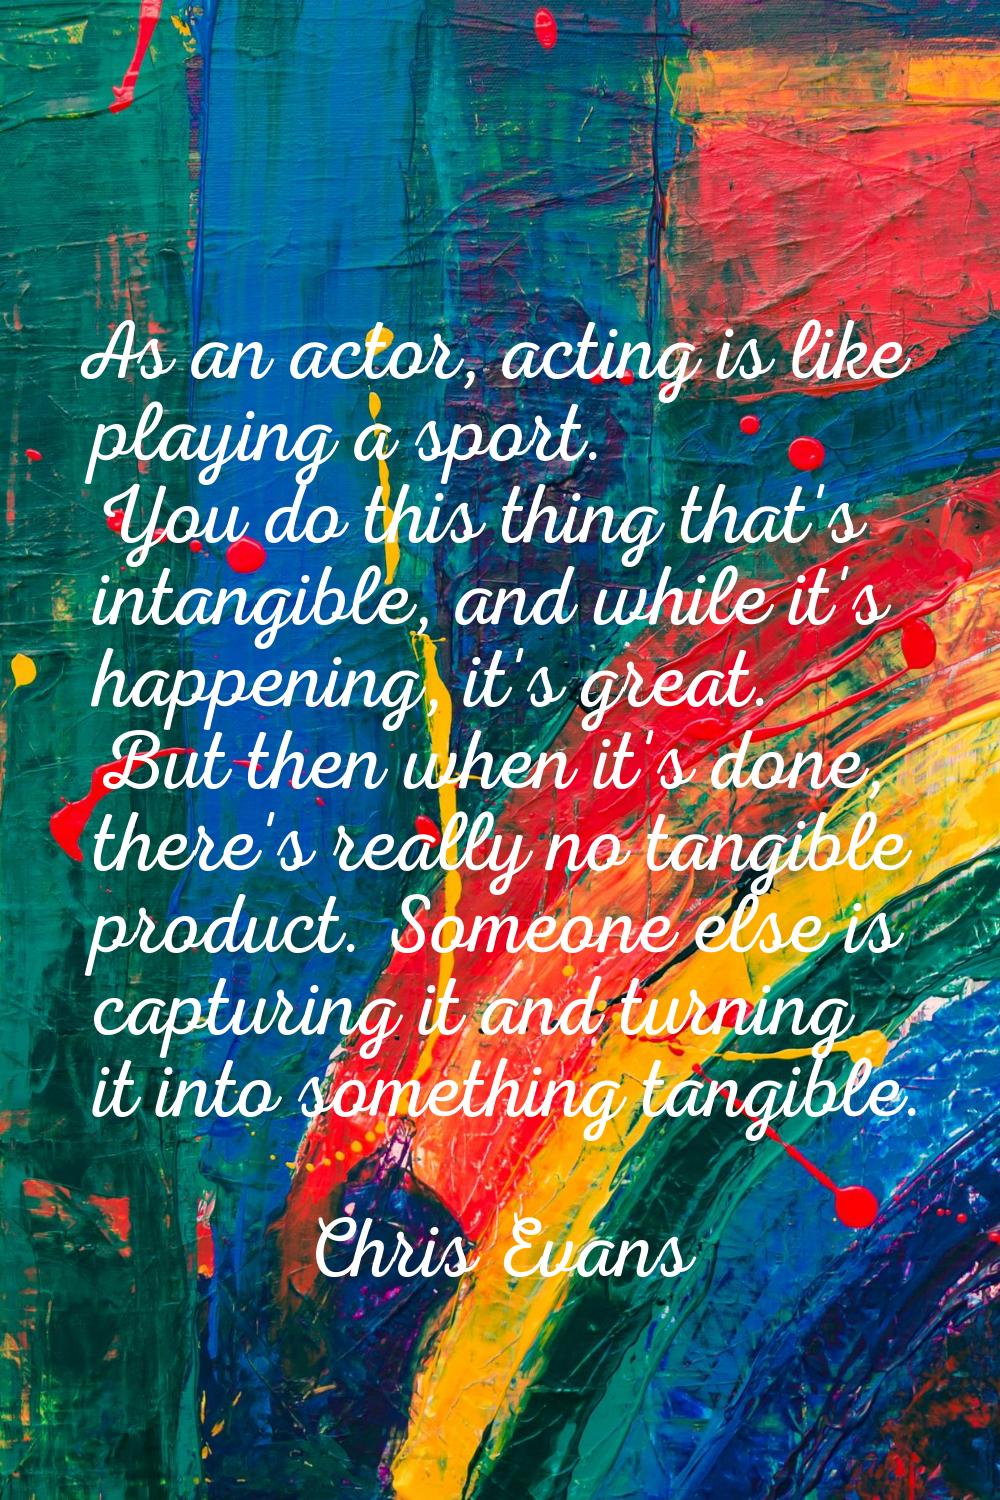 As an actor, acting is like playing a sport. You do this thing that's intangible, and while it's ha